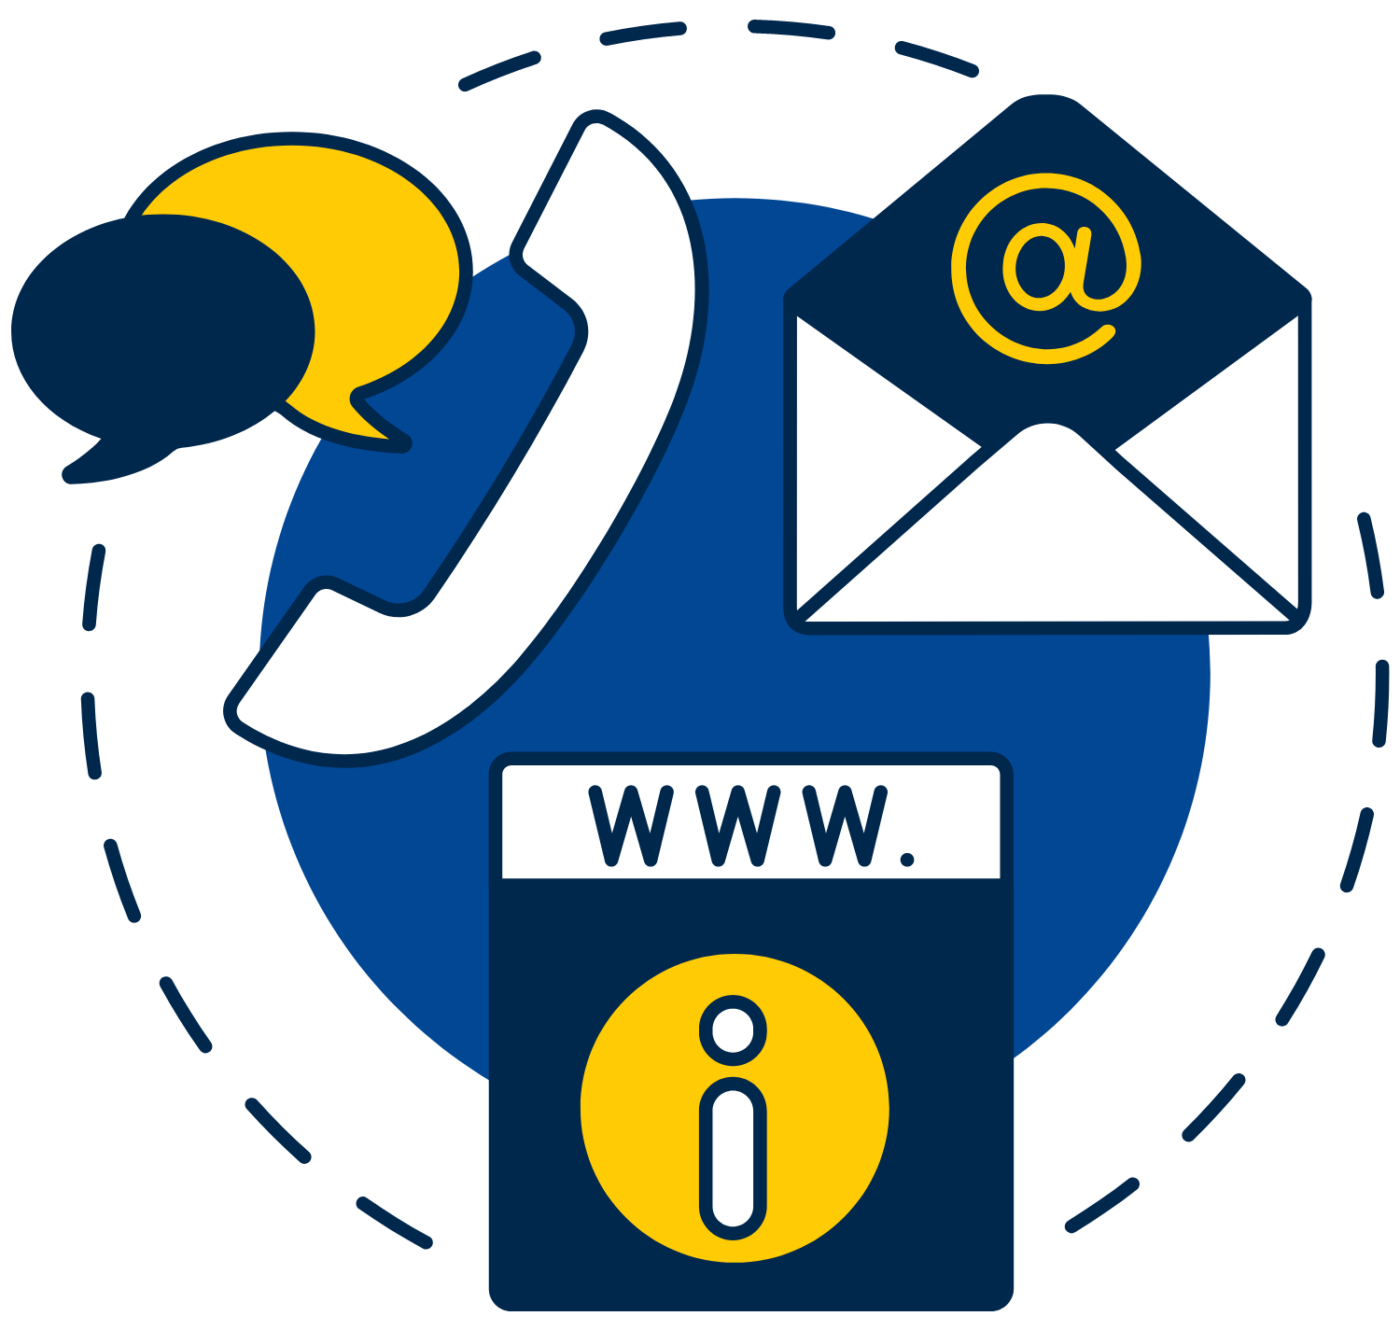 Phone email and website contact us icon